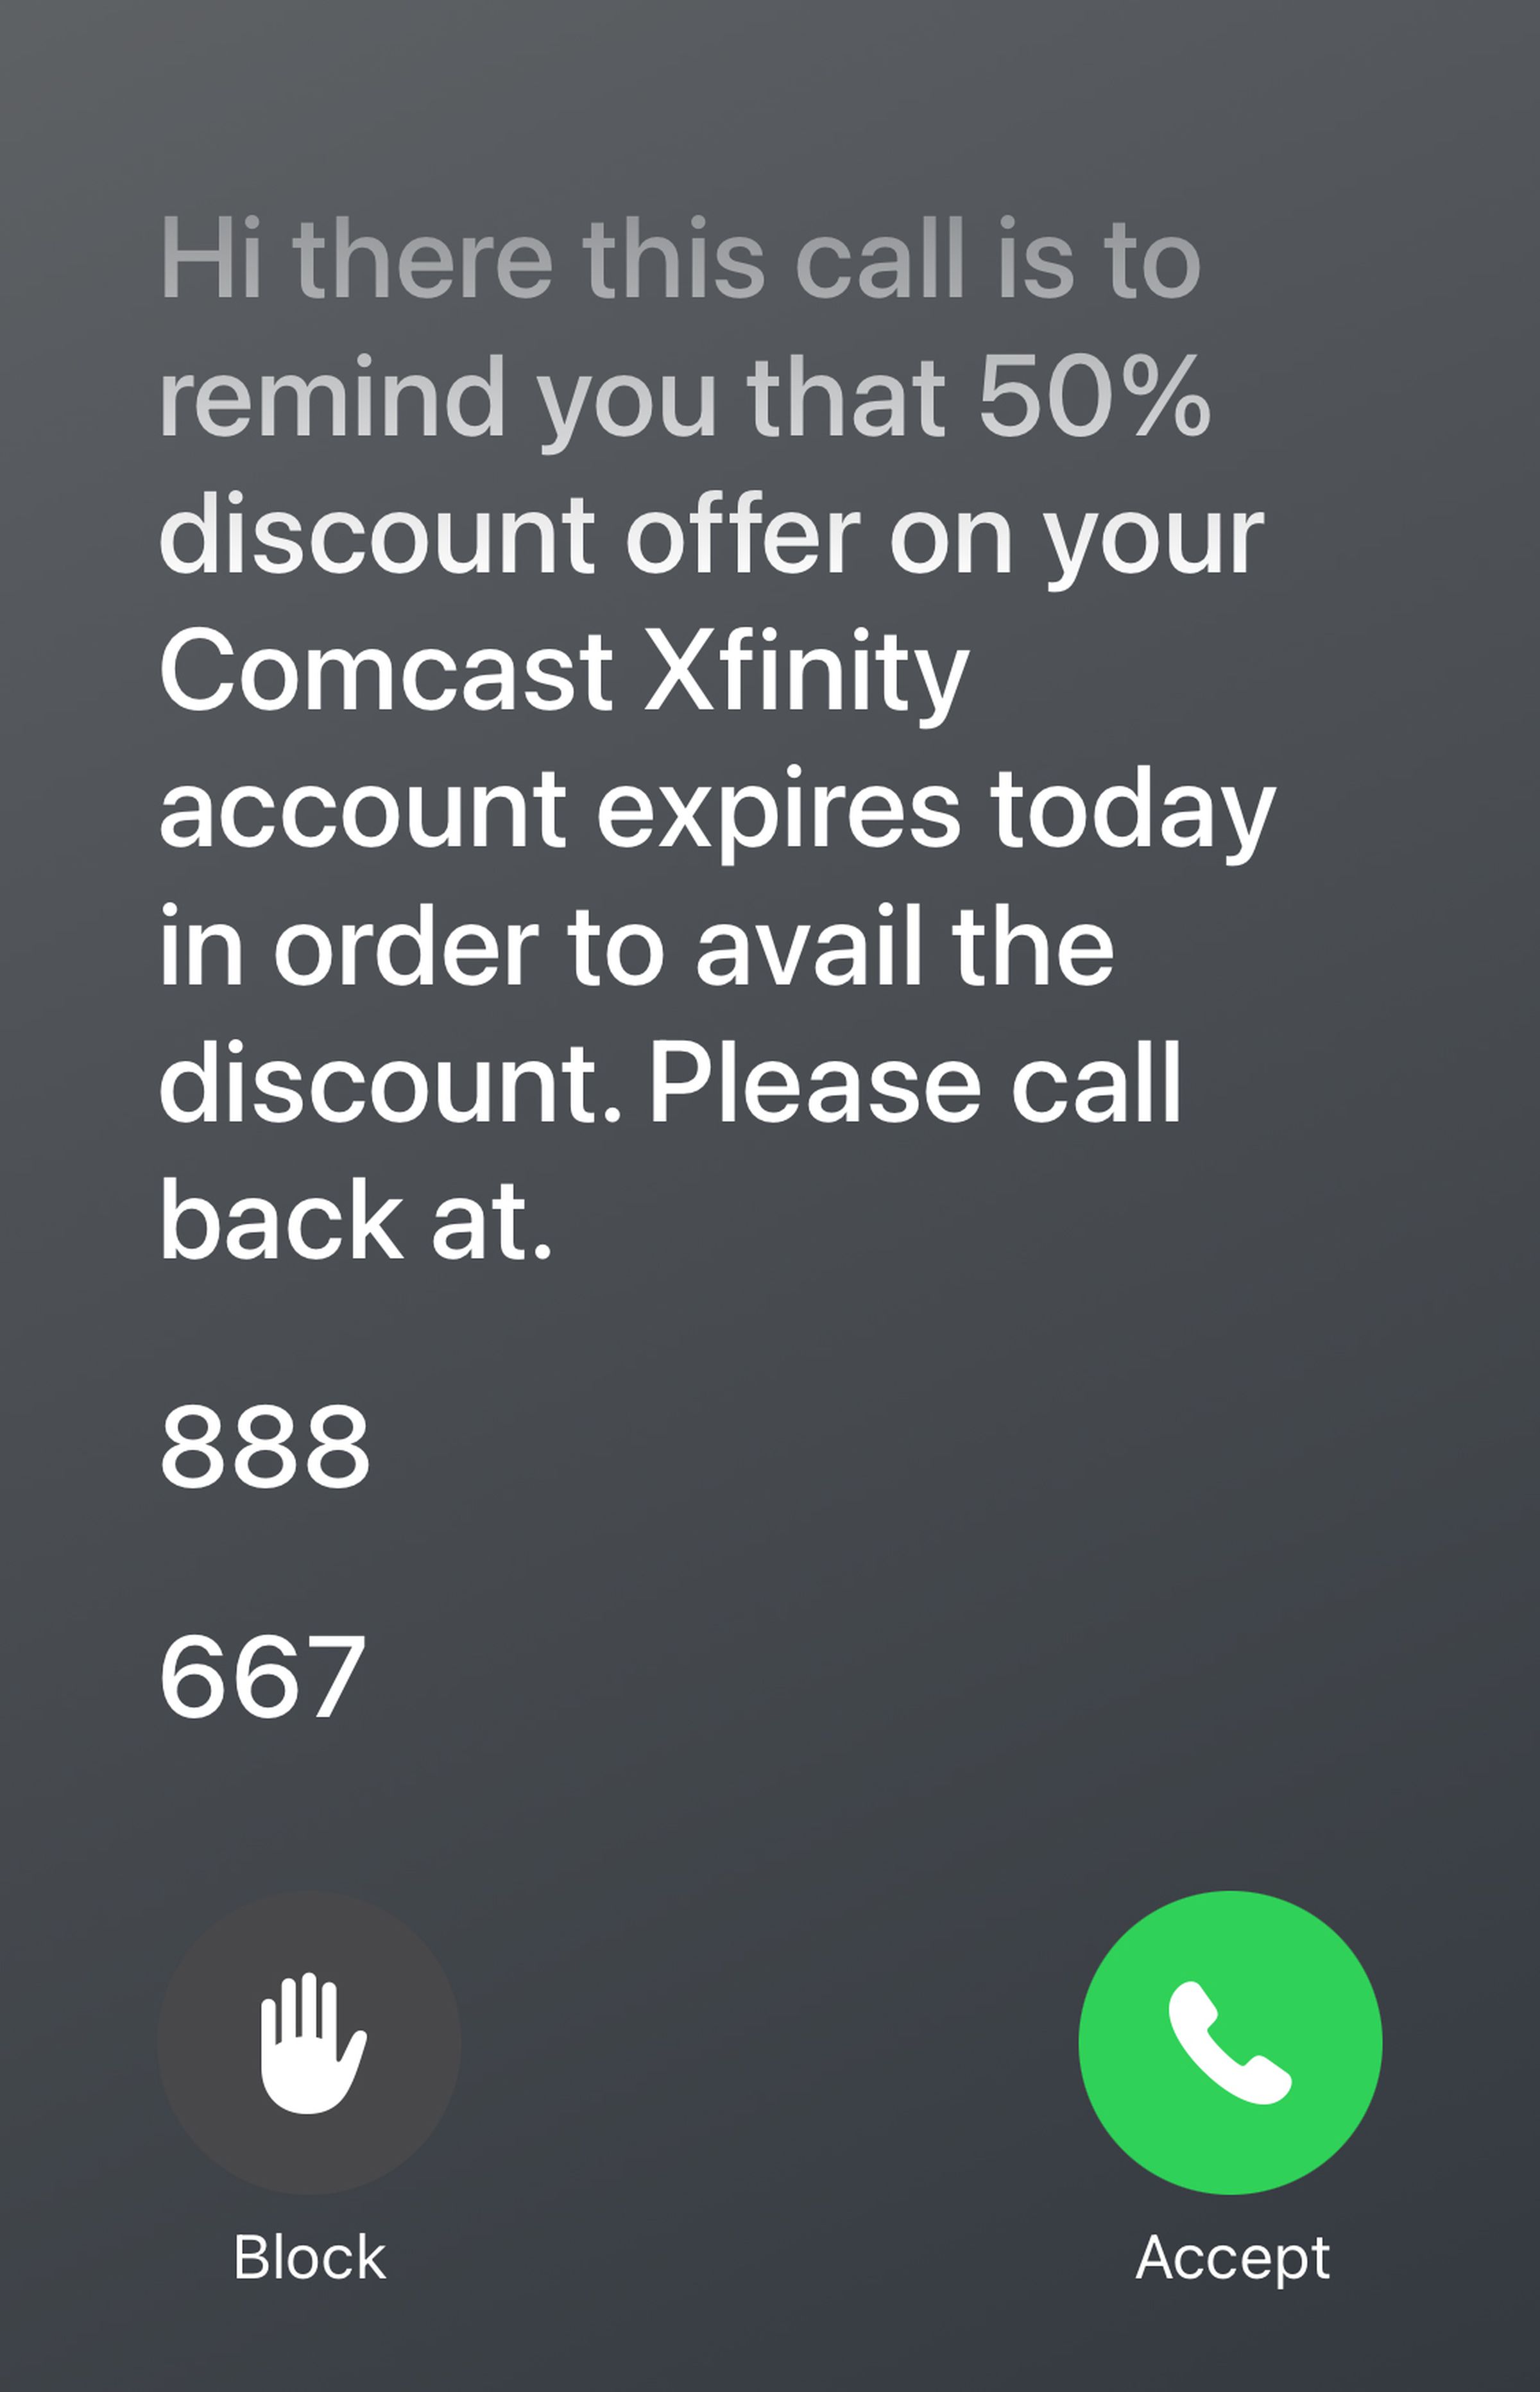 Screengrab of live transcription interface showing text from a robocall.